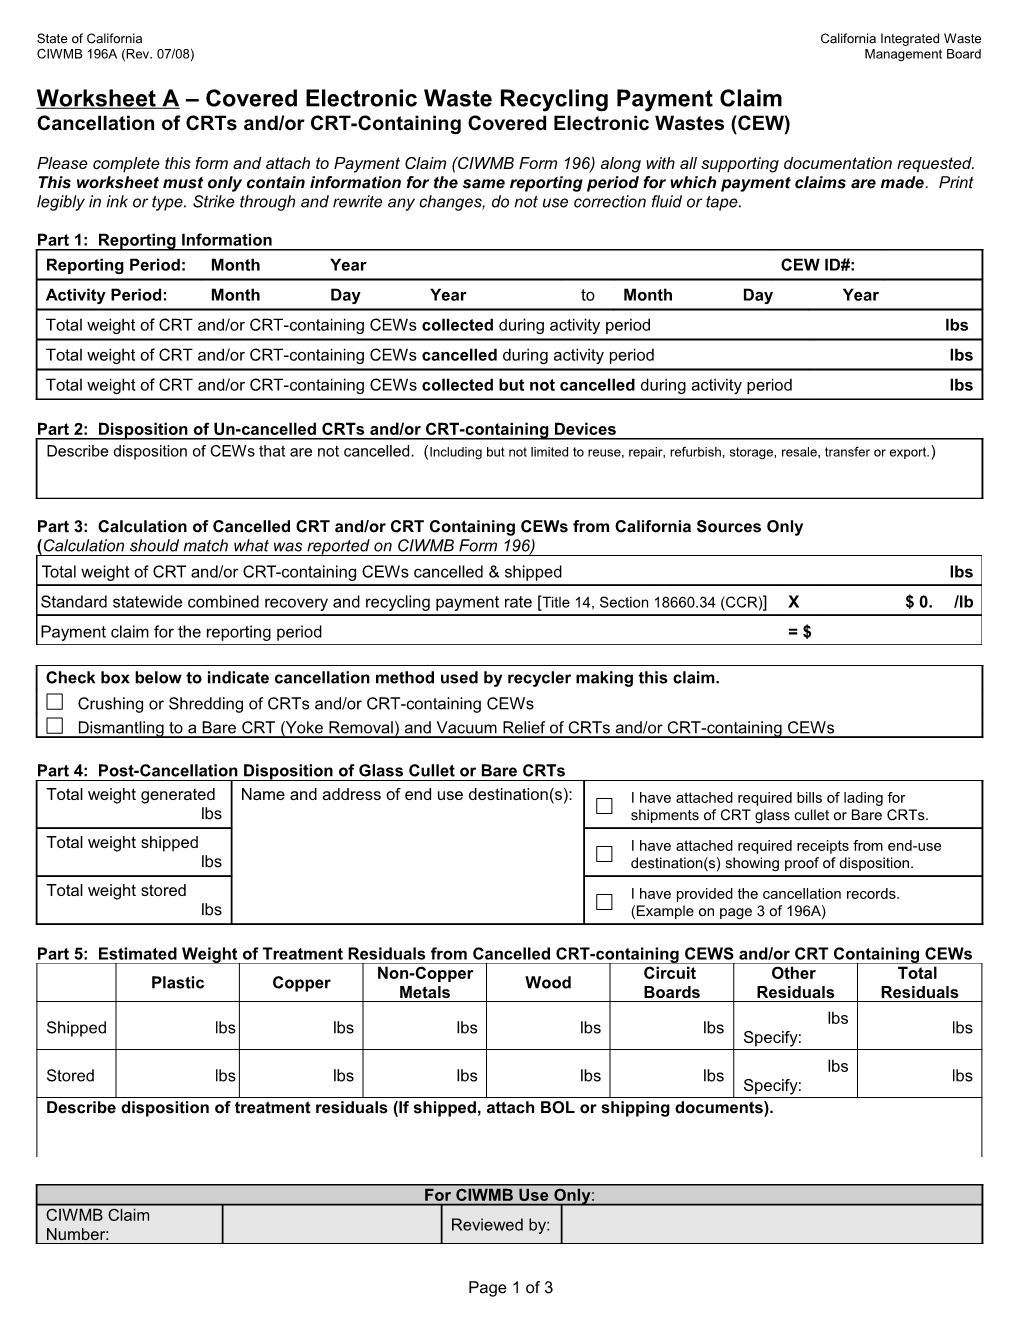 Covered Electronic Waste Recycling Payment Claim-Worksheet A, CIWMB196A (Revised 07/08)